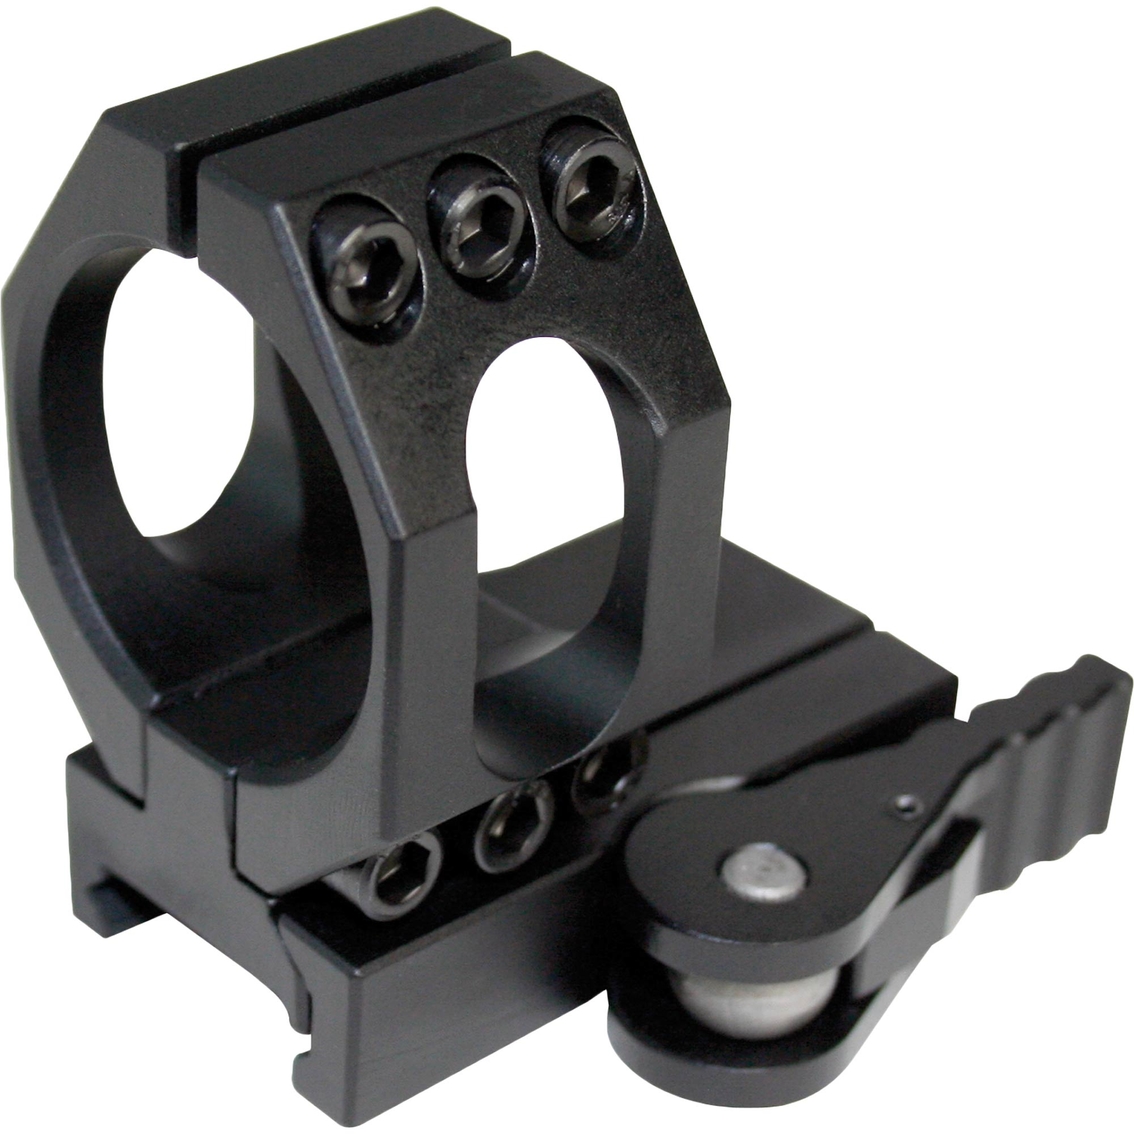 American Defense Low Profile Mount (Aimpoint) Quick Release - Image 2 of 2